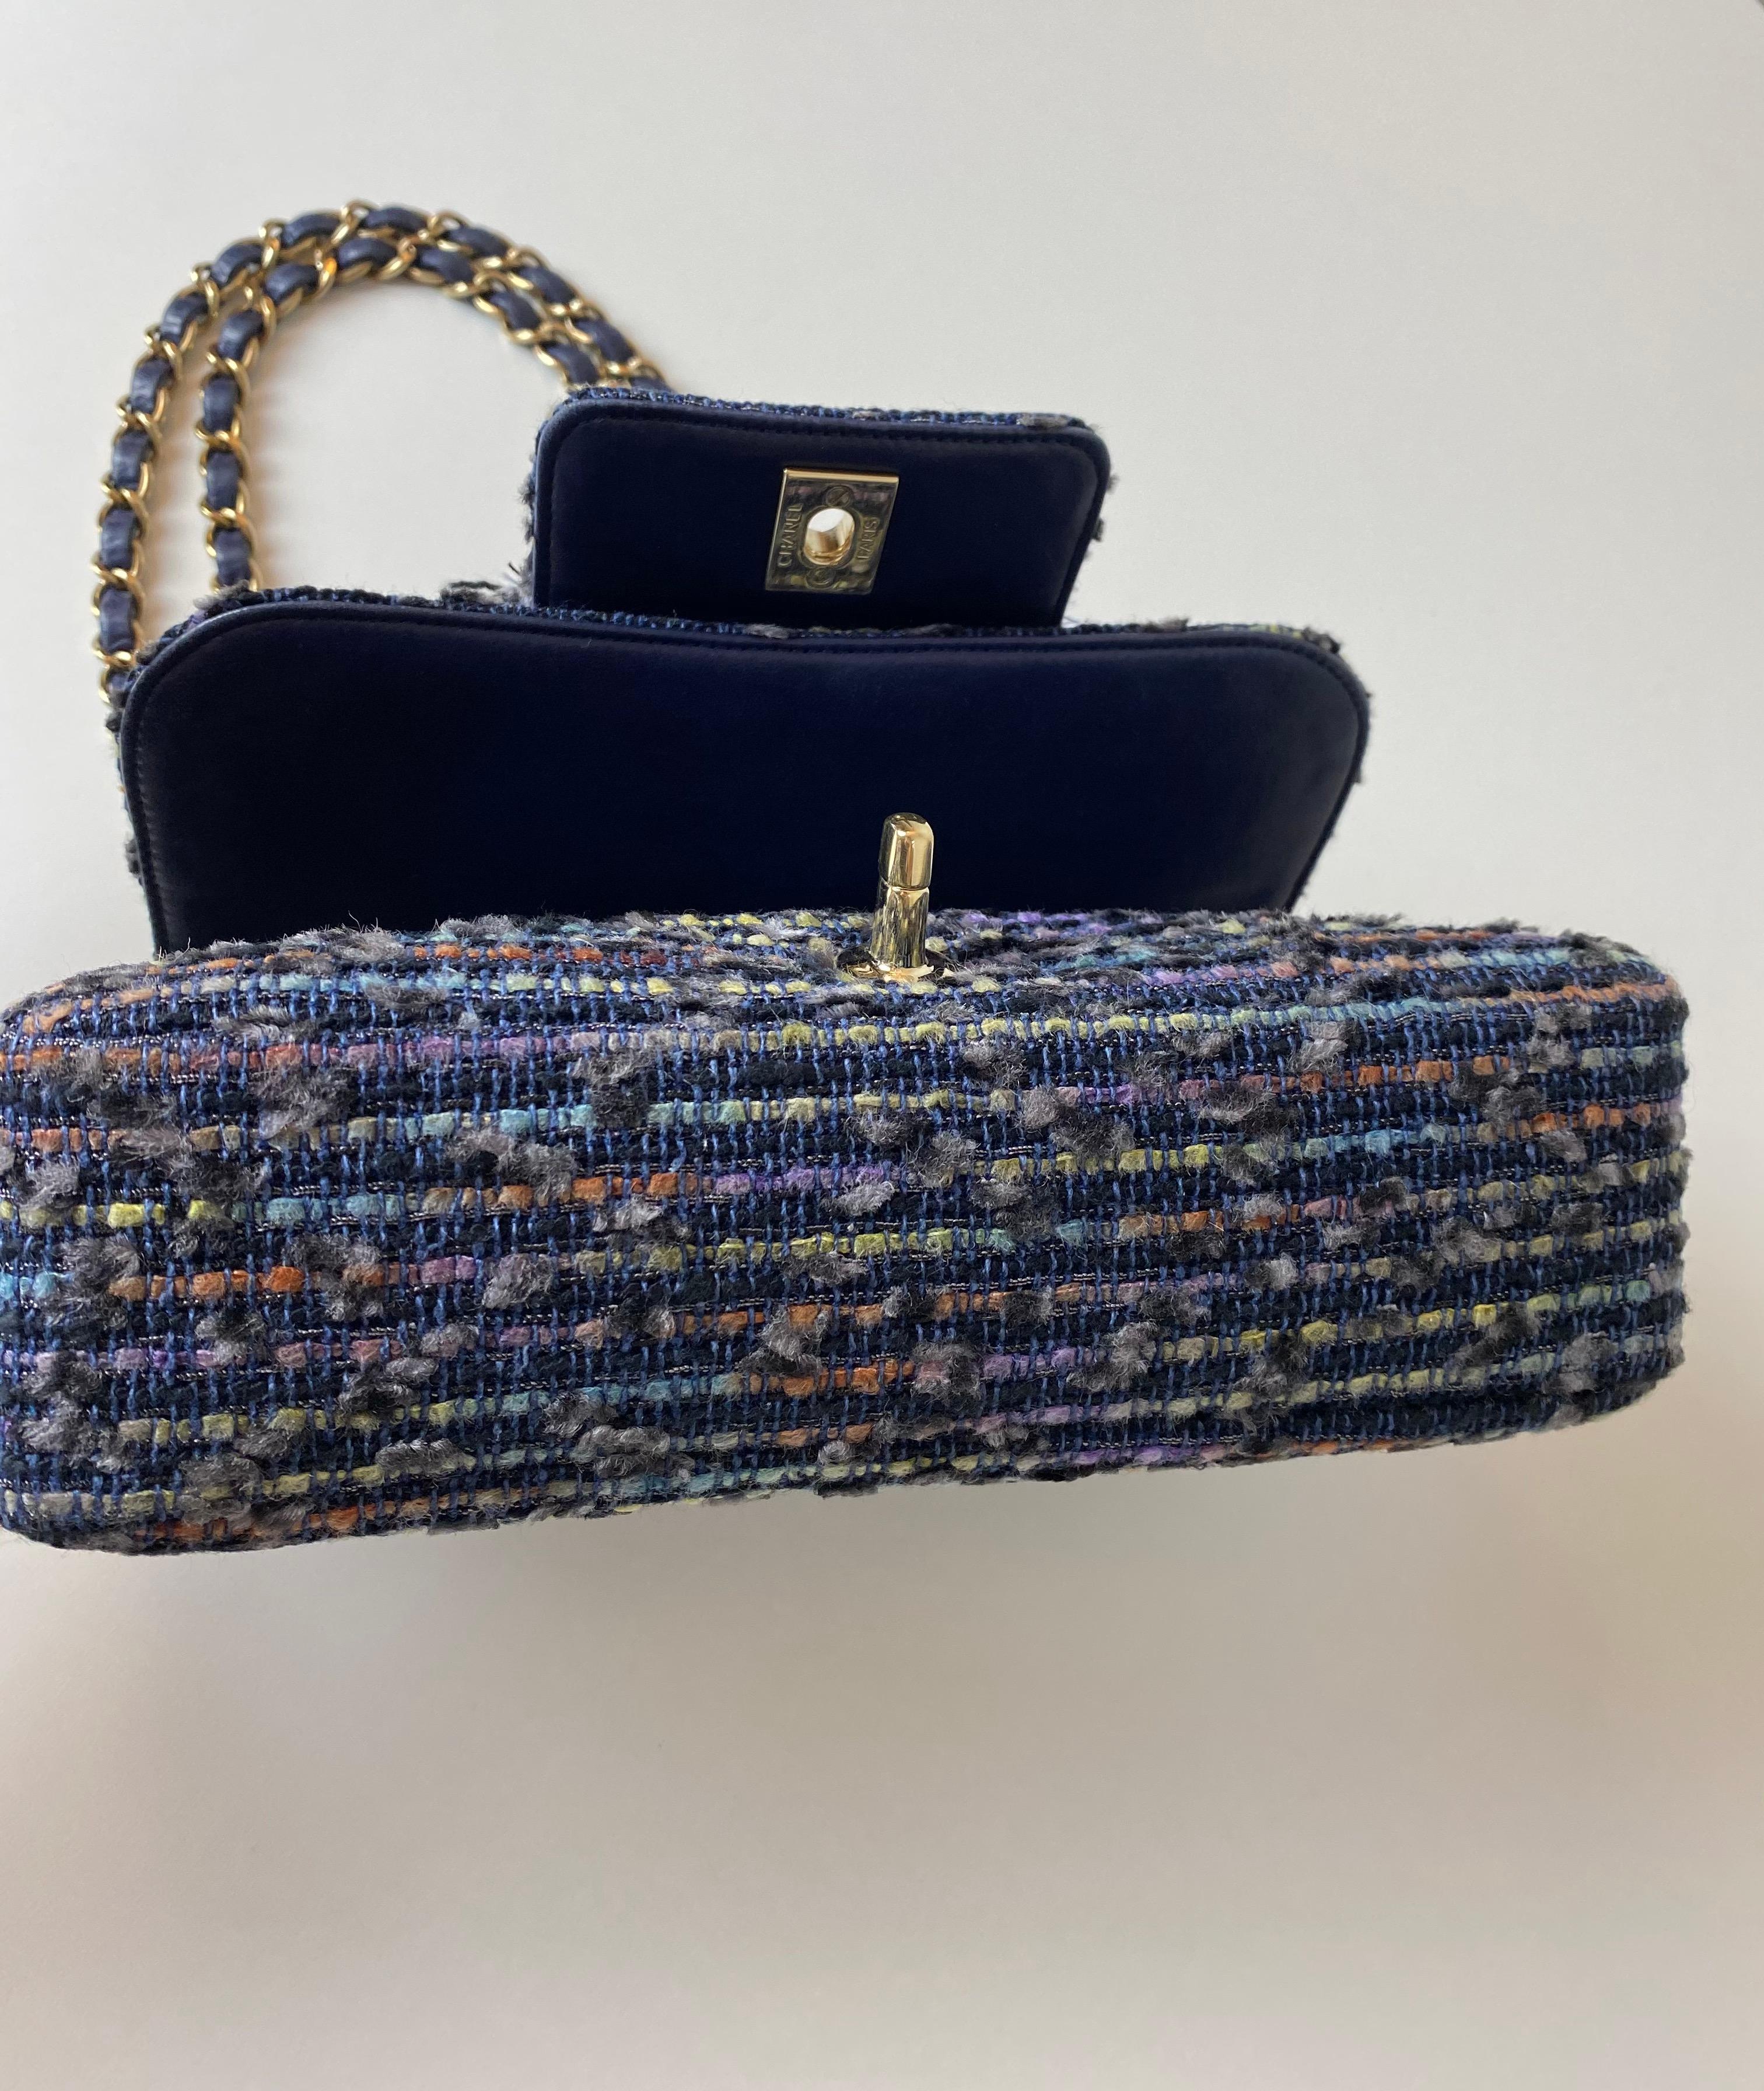 Chanel 2005 Classic Flap Vintage Jeweled Sequin Mermaid Navy Blue Tweed Bag For Sale 7